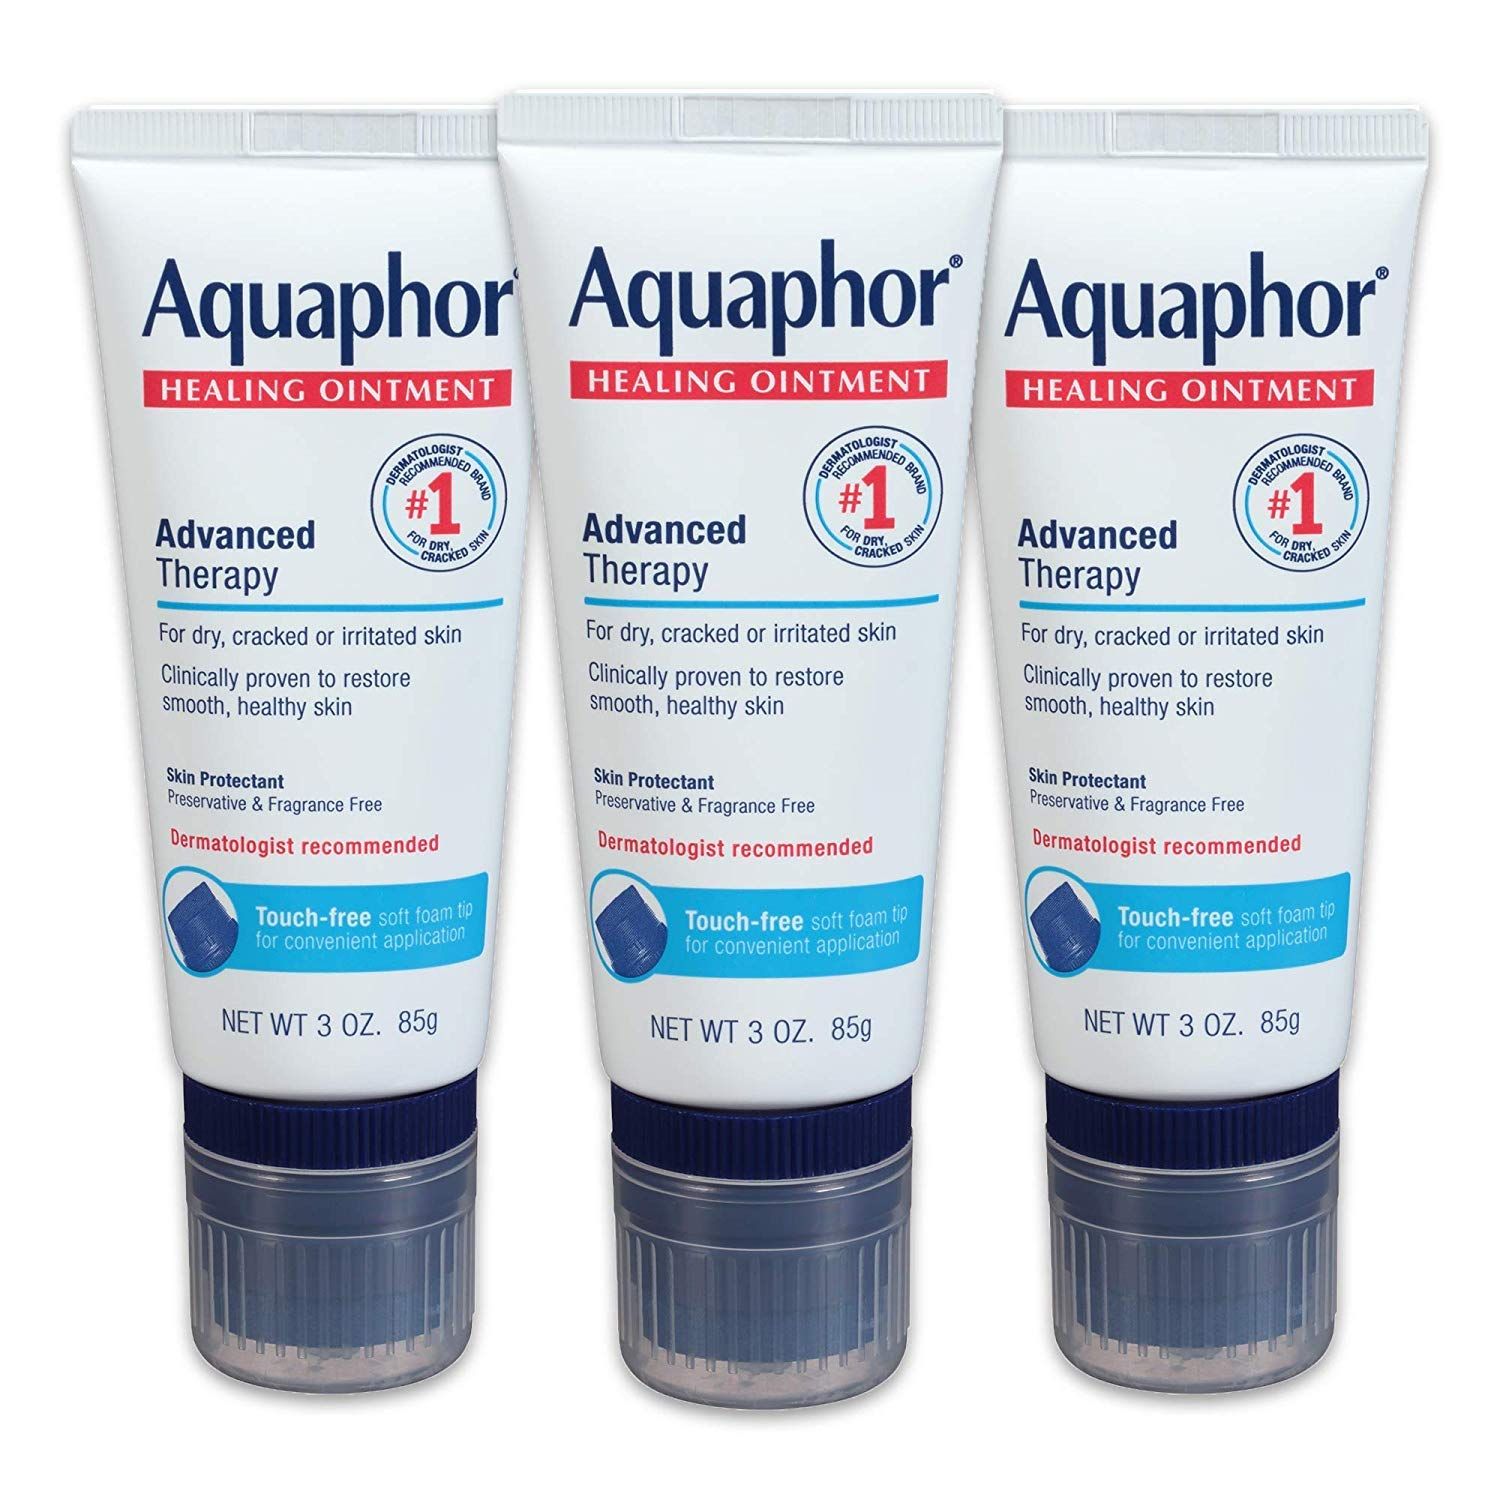 Aquaphor Healing Ointment With Touch-Free Applicator For Dry Chapped Skin, Use After Hand Washing fo | Amazon (US)